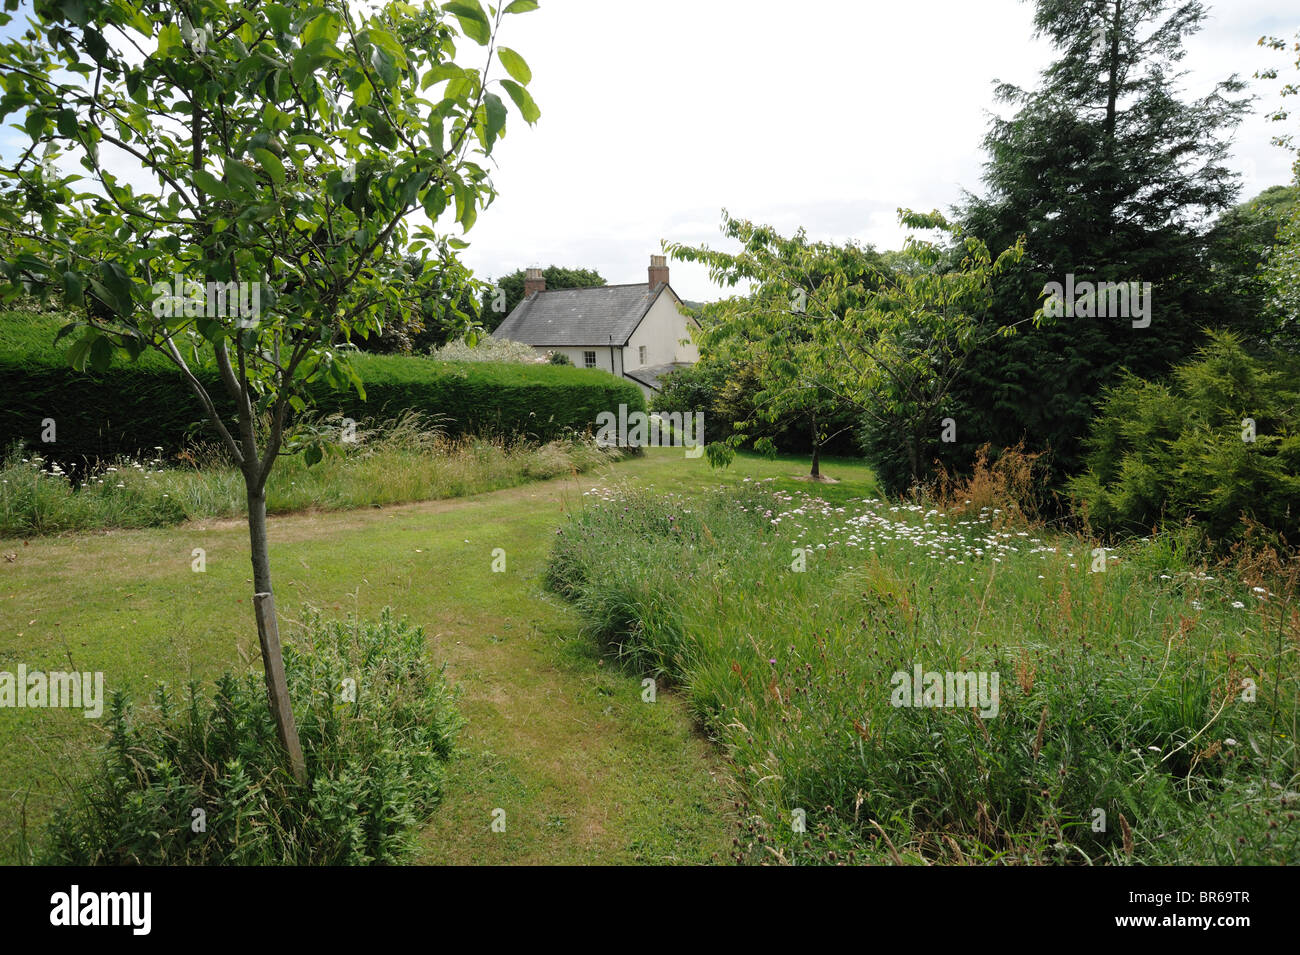 Natural environmentally friendly meadow garden with fruit trees and pathways cut for access Stock Photo